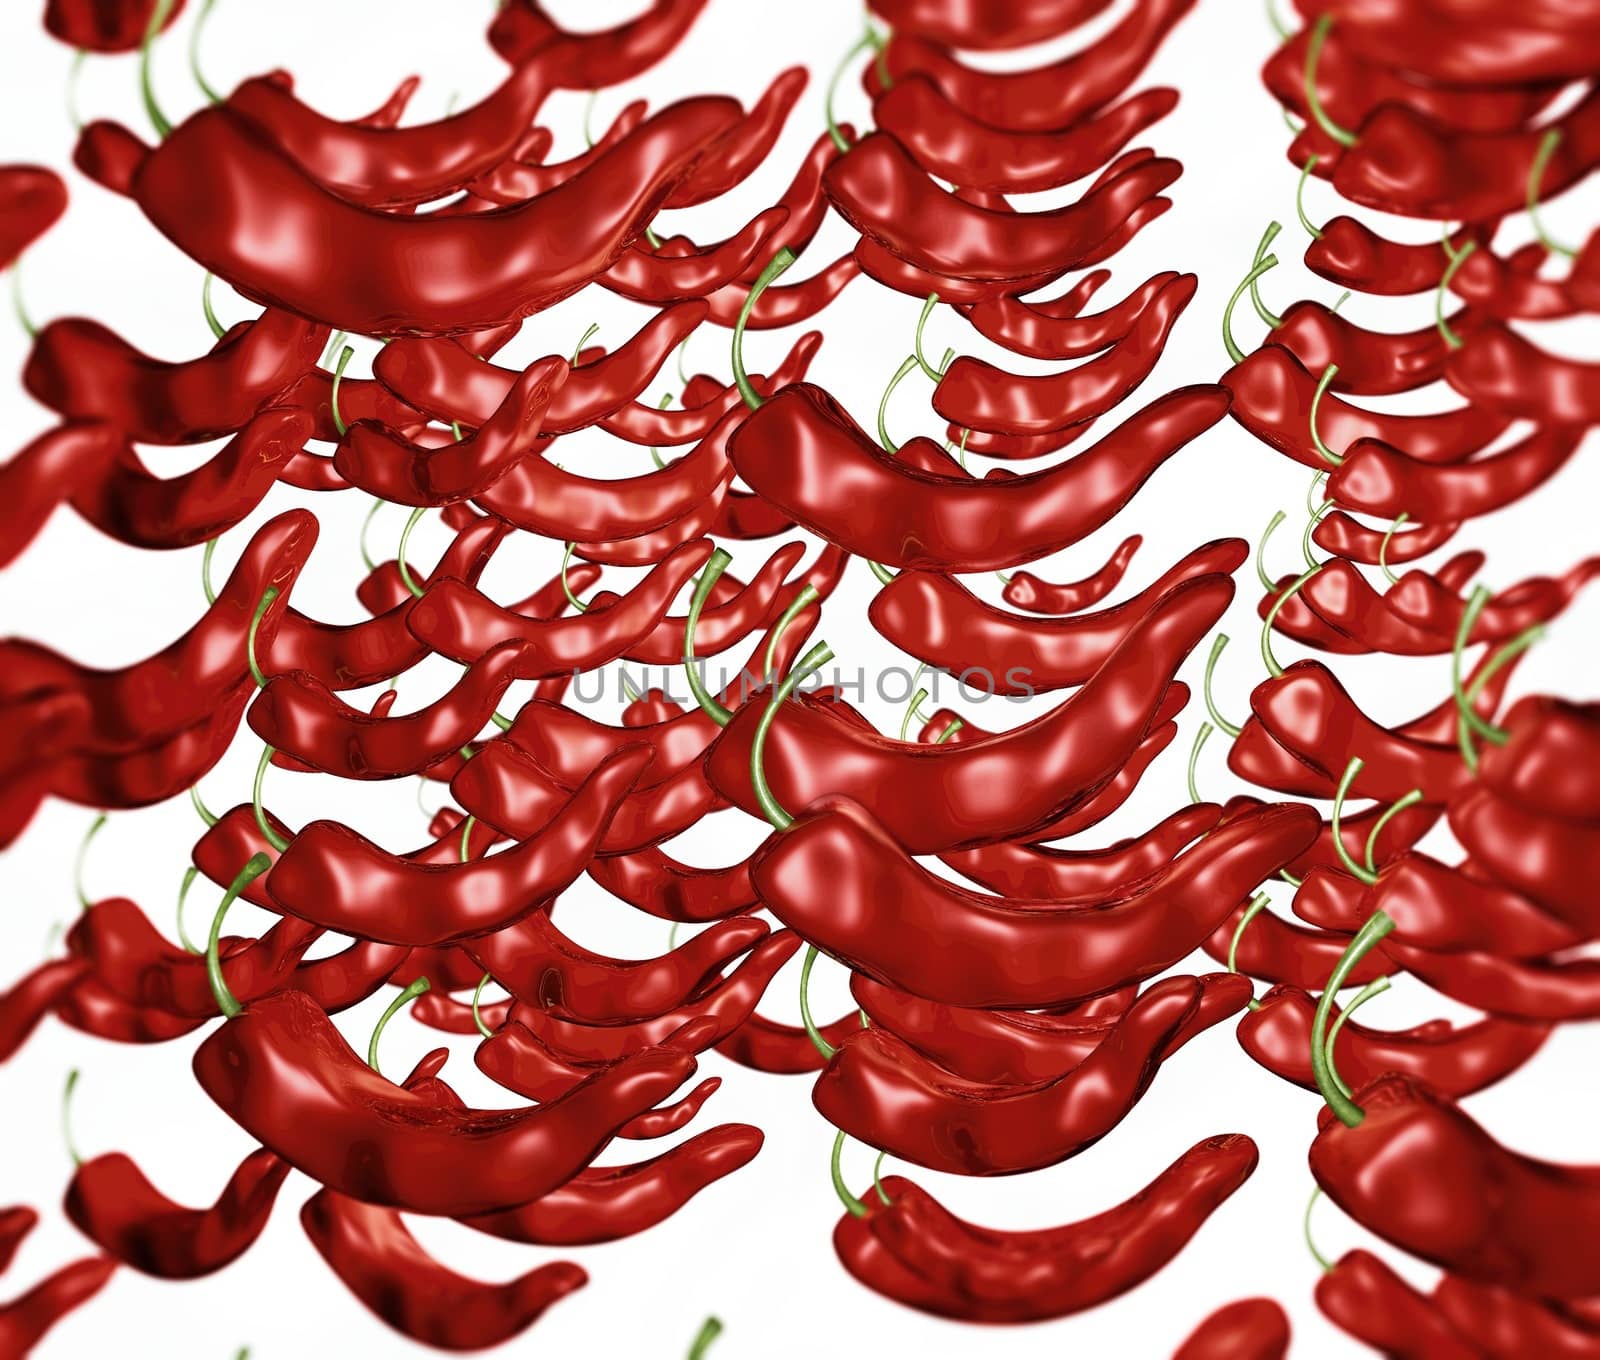 Illustration with many red hot peppers